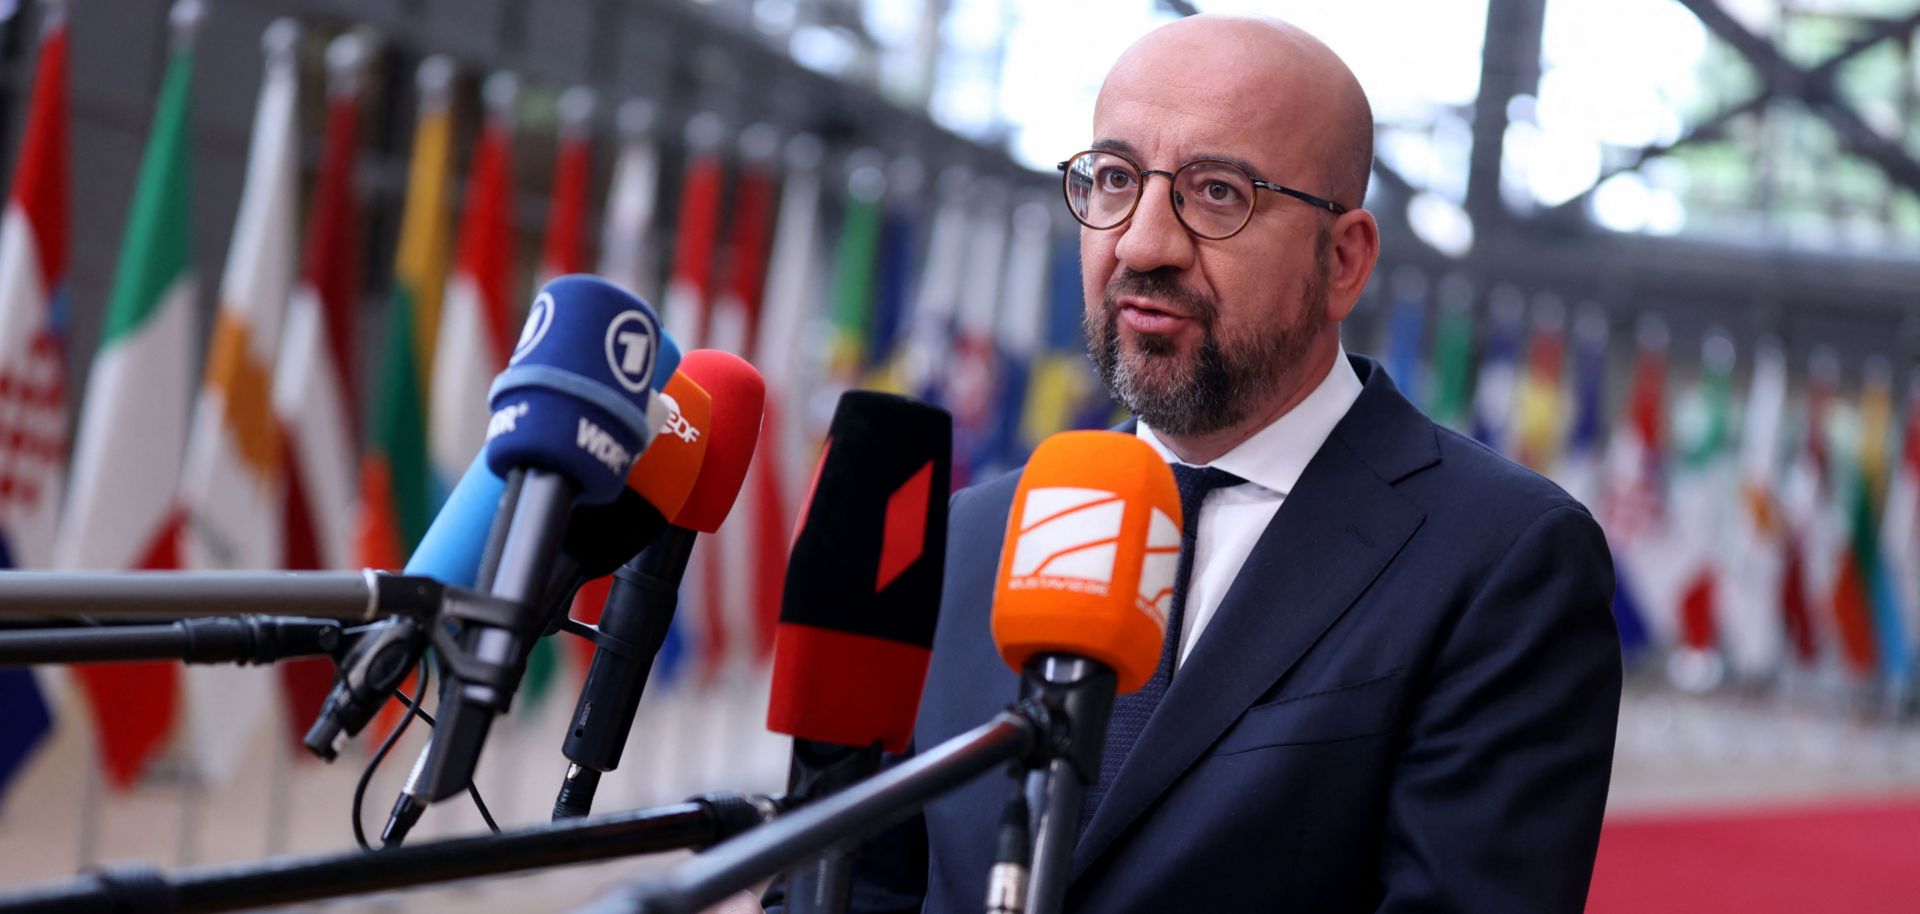 European Council president Charles Michel talks with the press on May 30, 2022, after arriving in Brussels, Belgium, for a special EU meeting focused on the war in Ukraine and sanctions against Russia. 